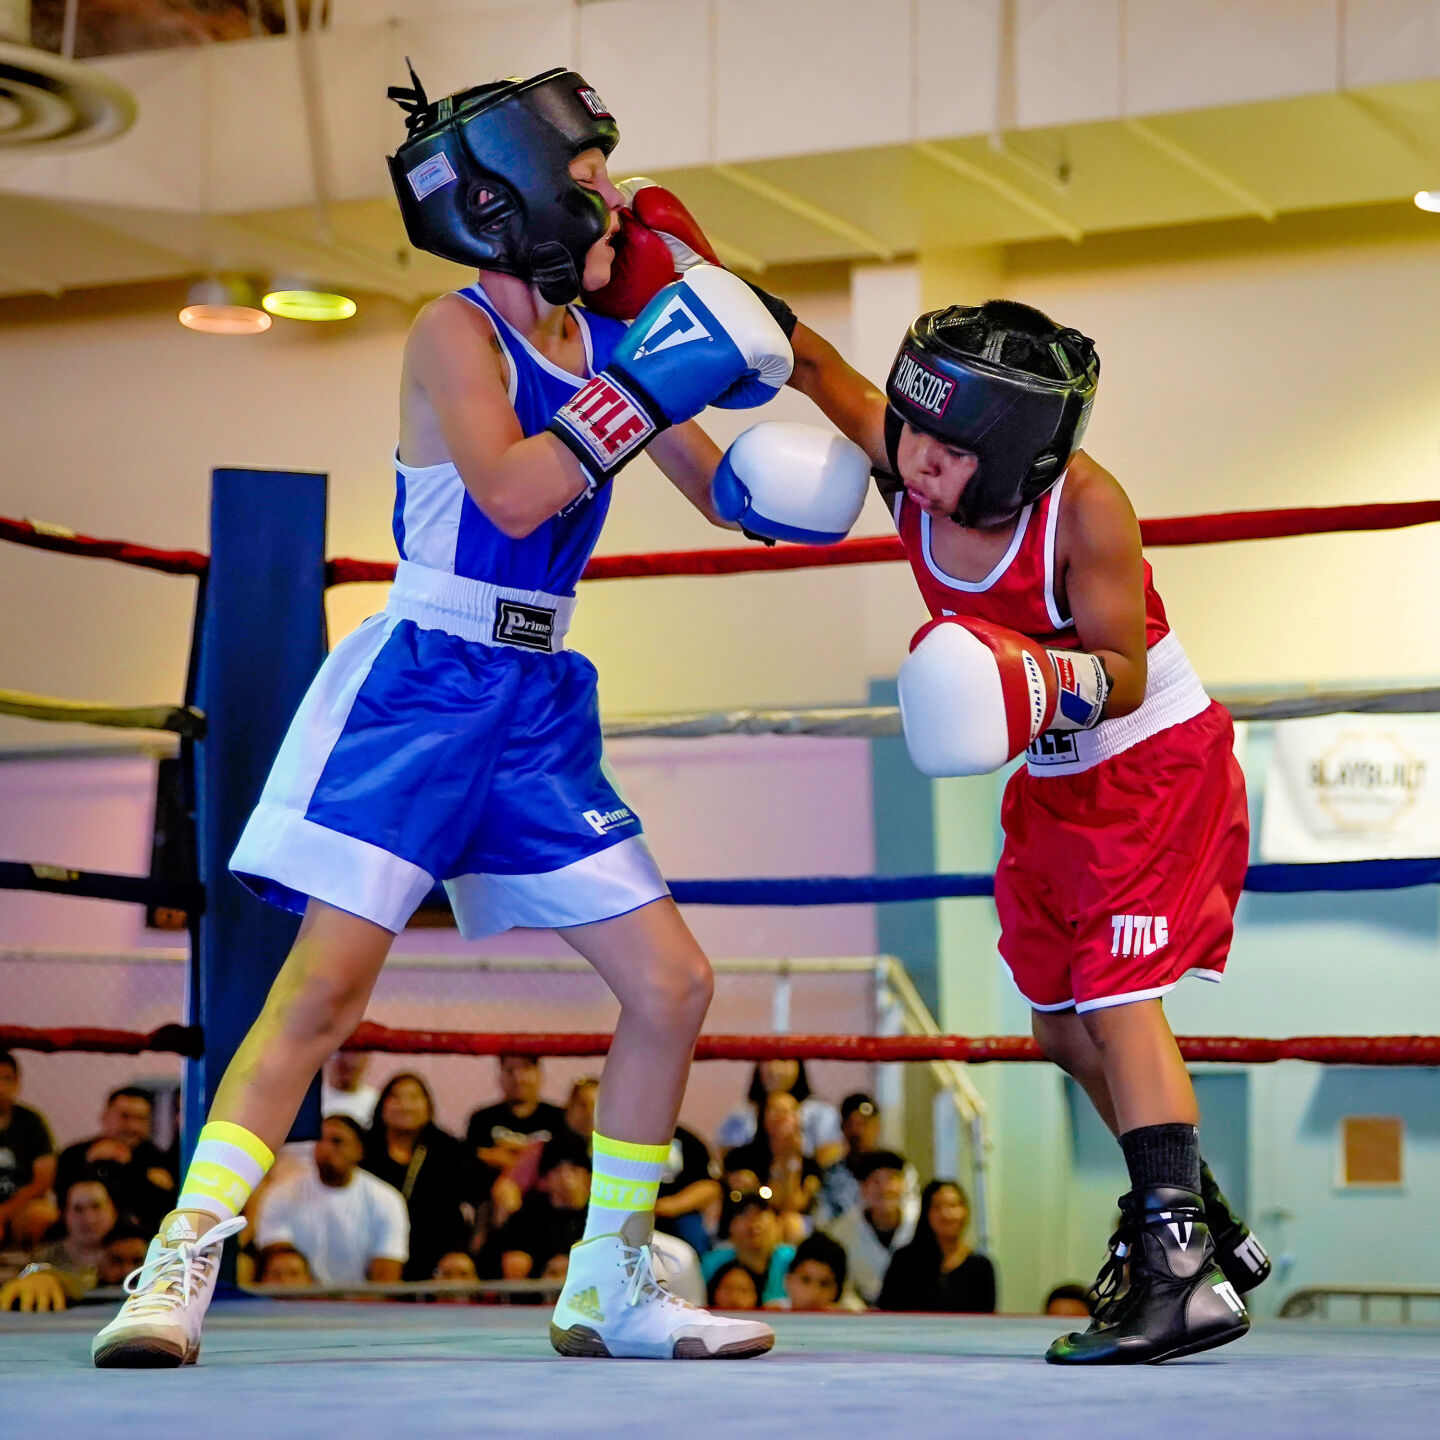 Napa Valley Youth Boxing Al Amanecer, Napa SAL fighters put on show